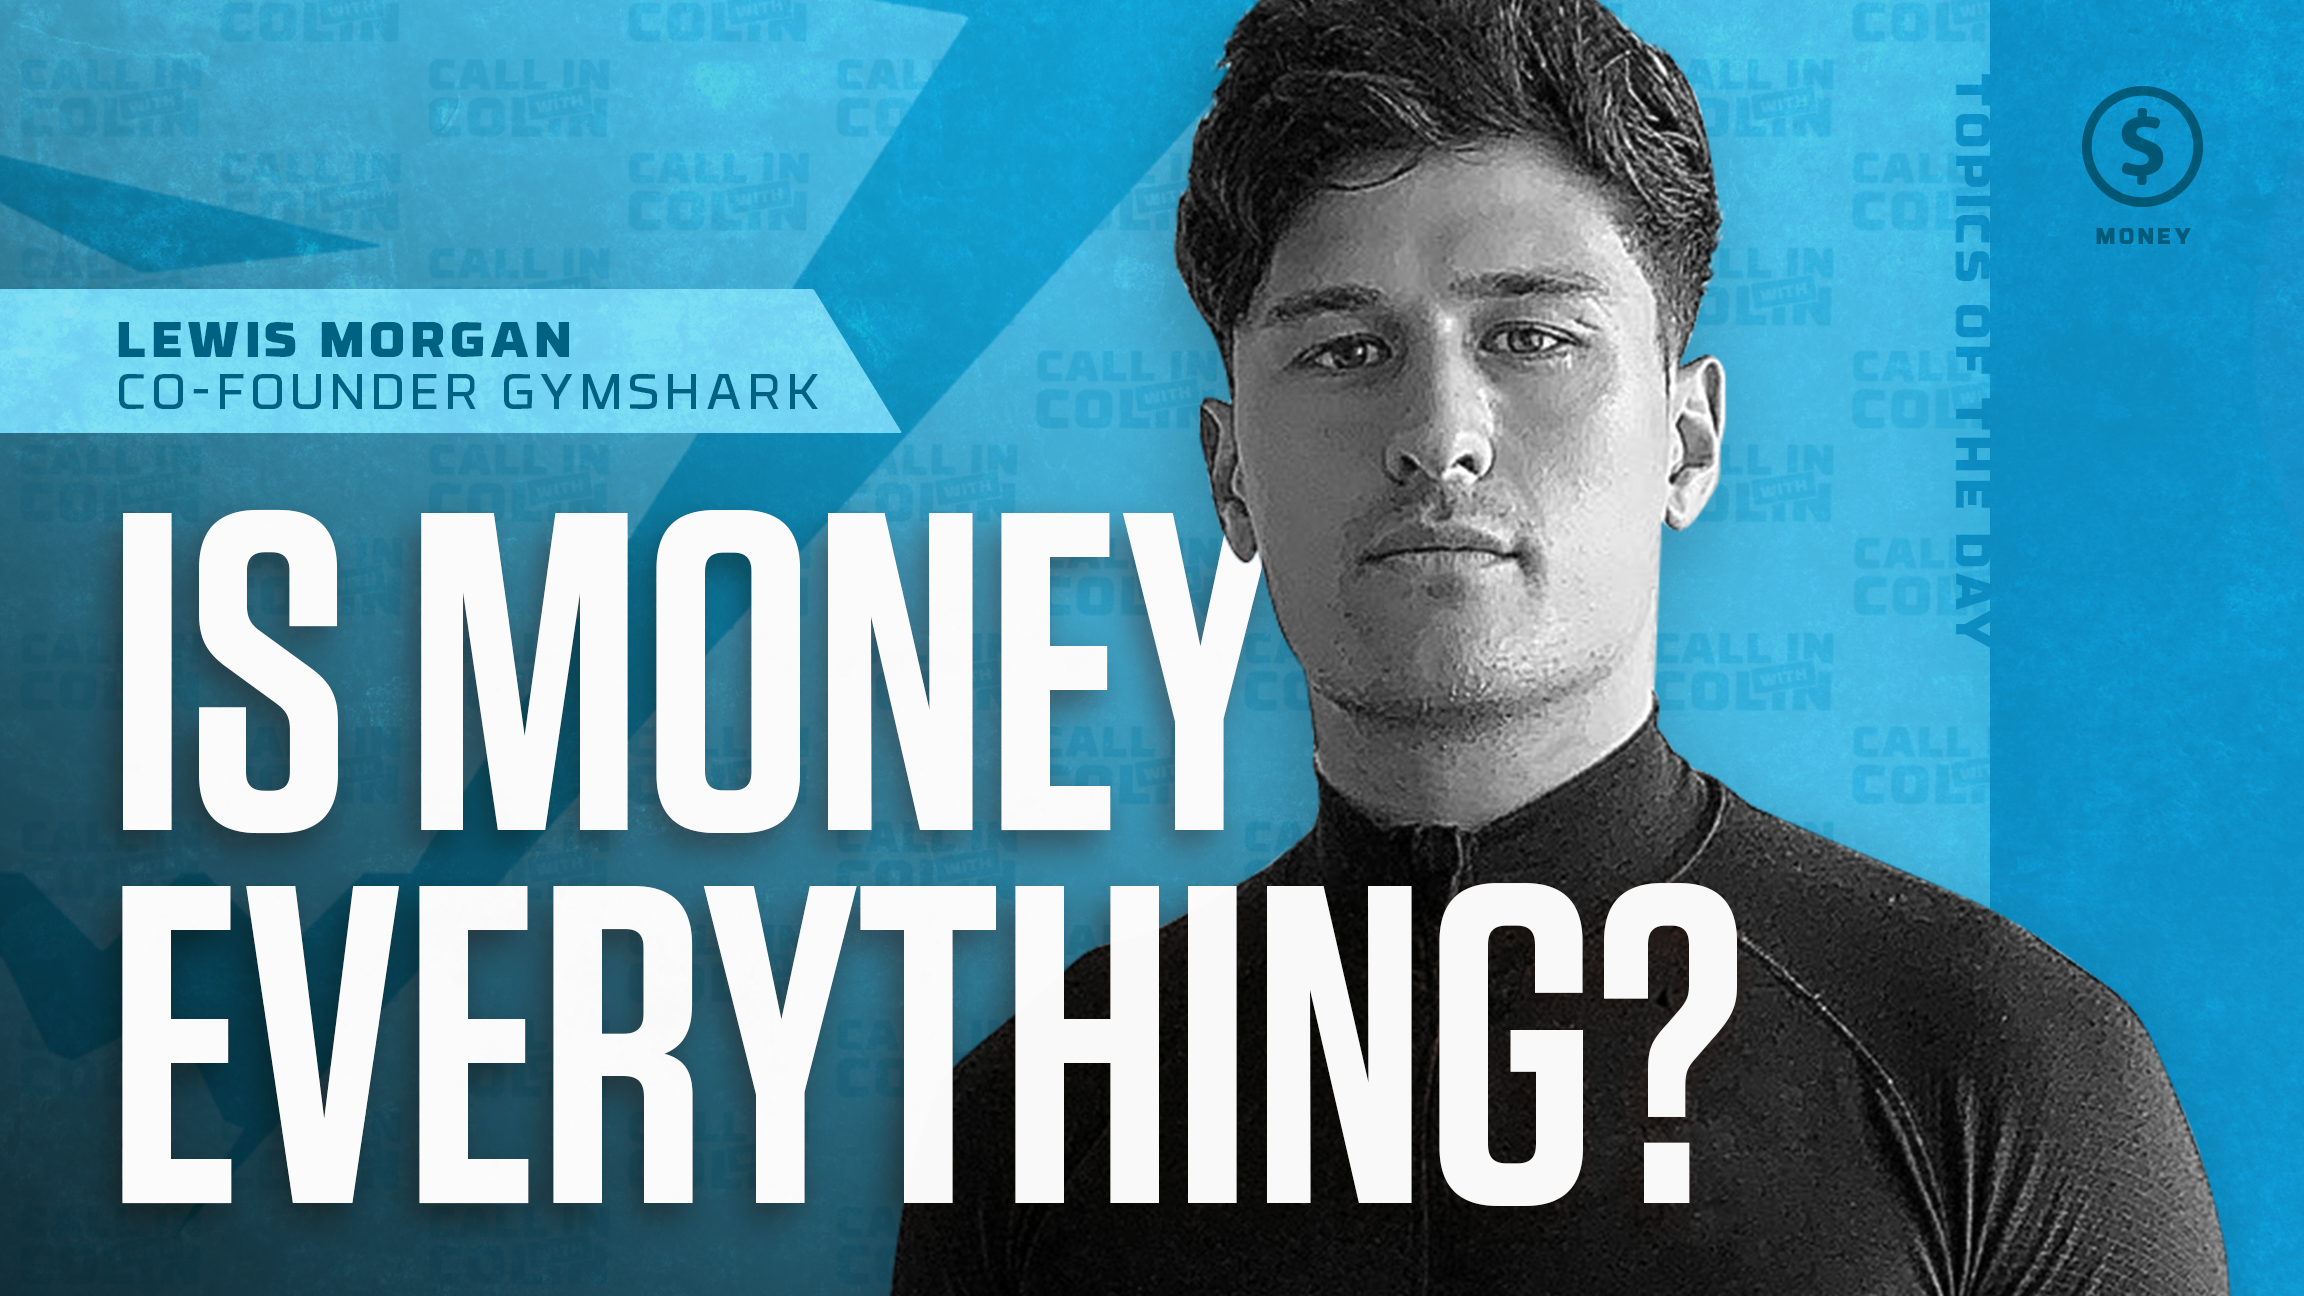 What Is Next After Gymshark?